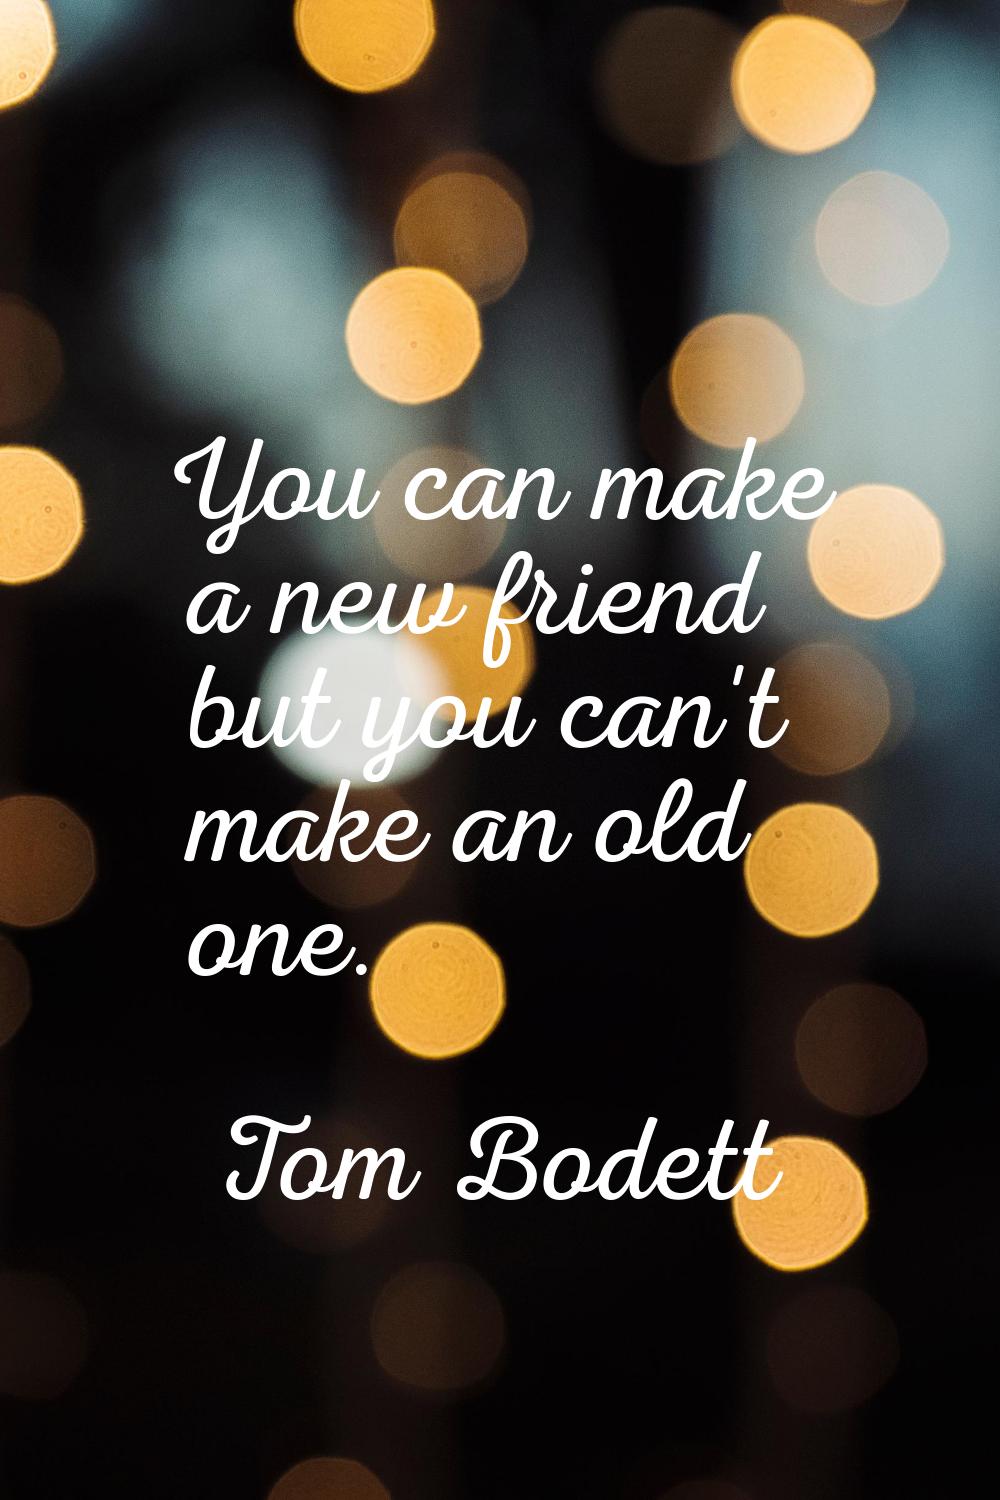 You can make a new friend but you can't make an old one.